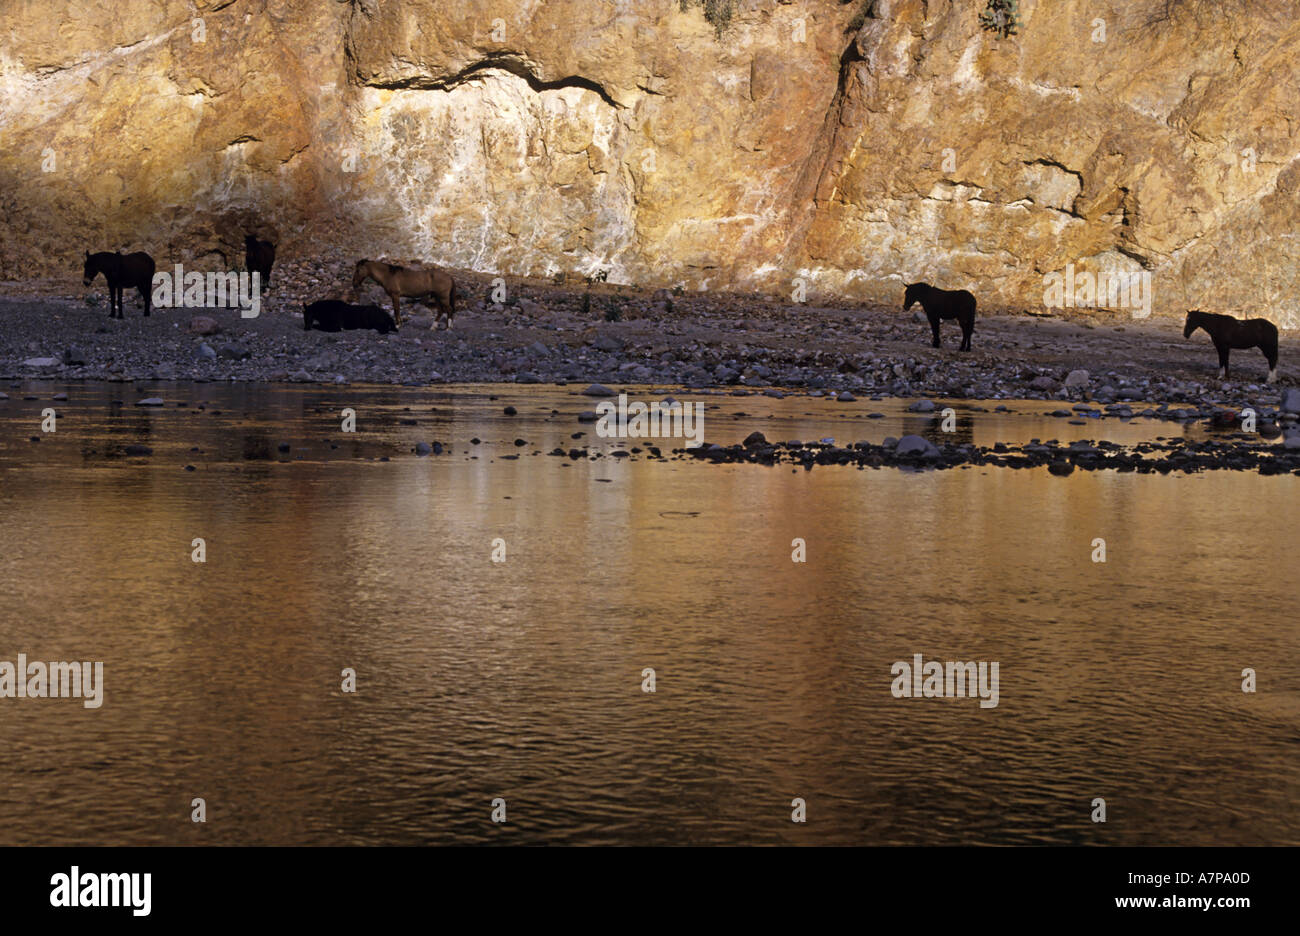 Mexico Chihuahua State Batopilas In The Copper Canyon Horses Resting Near A River At Sunset Stock Photo